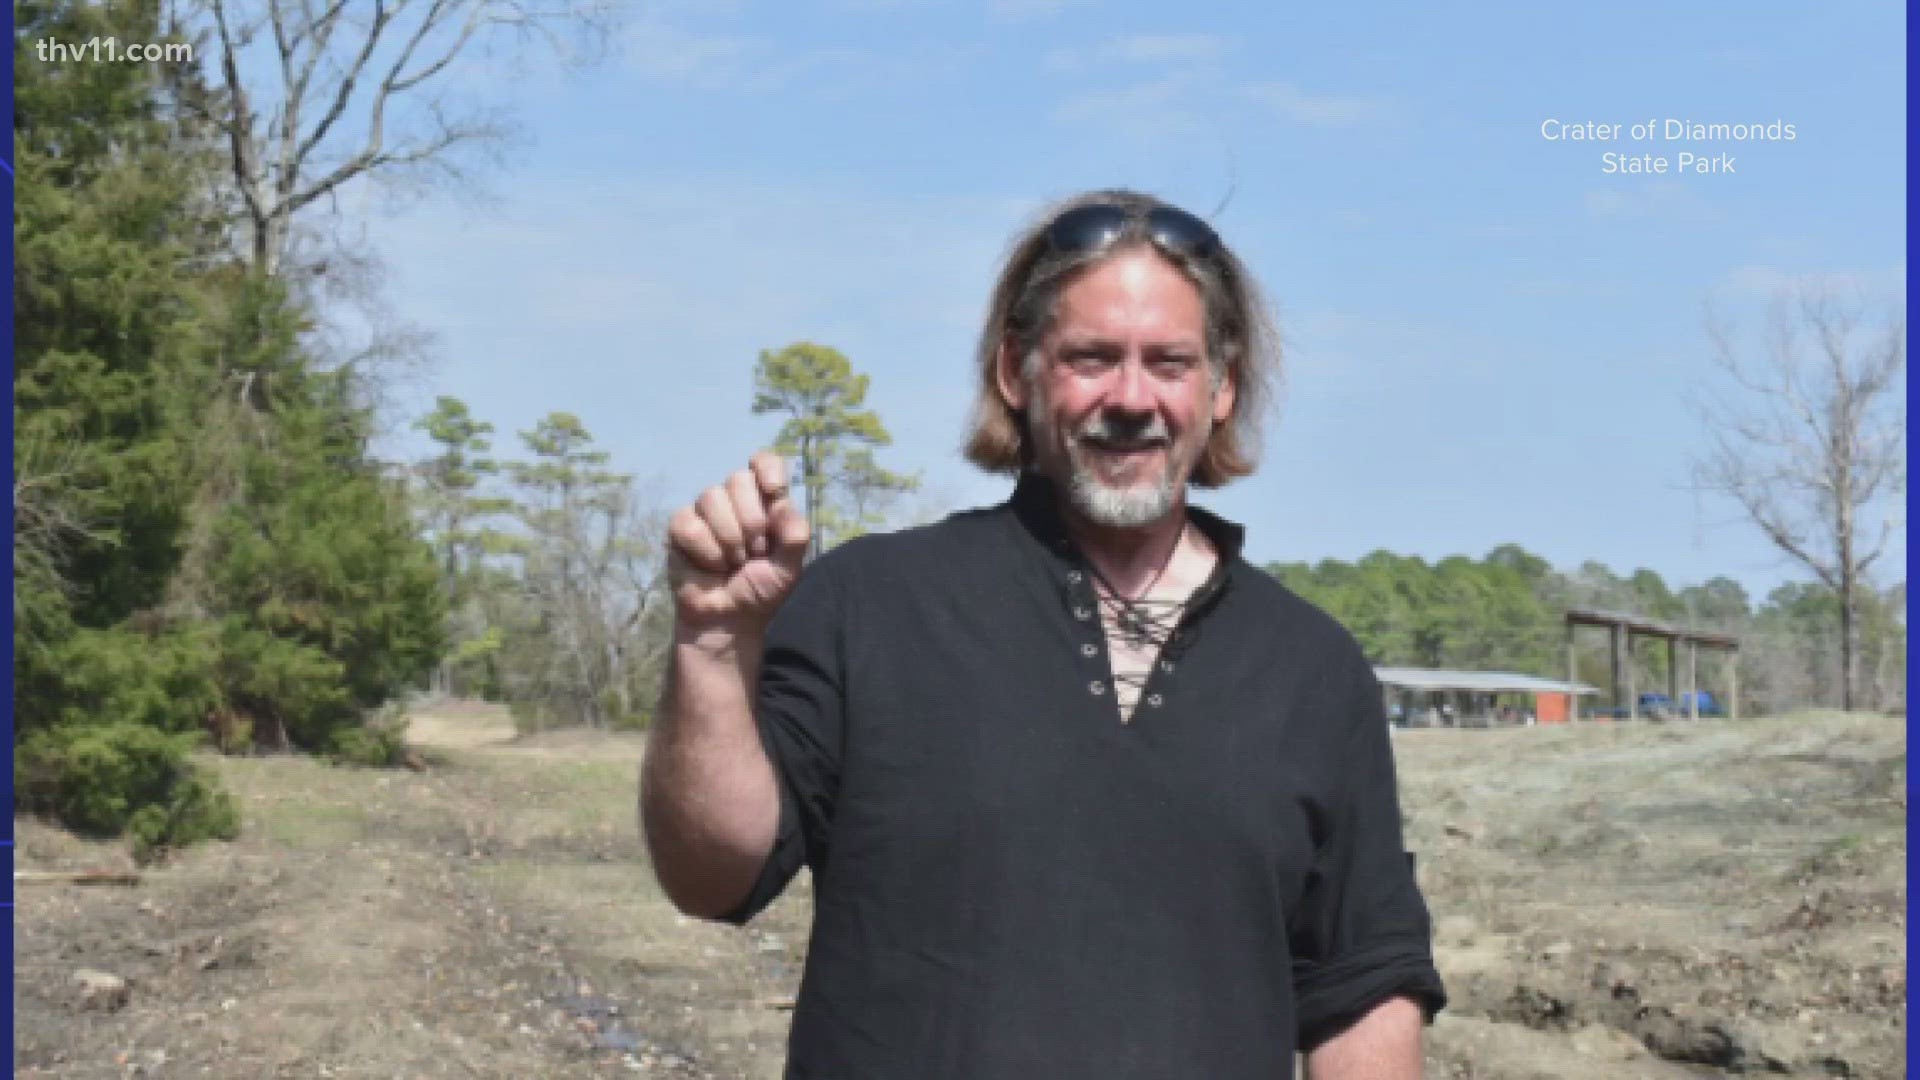 David Anderson of Murfreesboro was amazed to discover a 3.29-carat brown diamond at Arkansas’s Crater of Diamonds State Park during his visit.